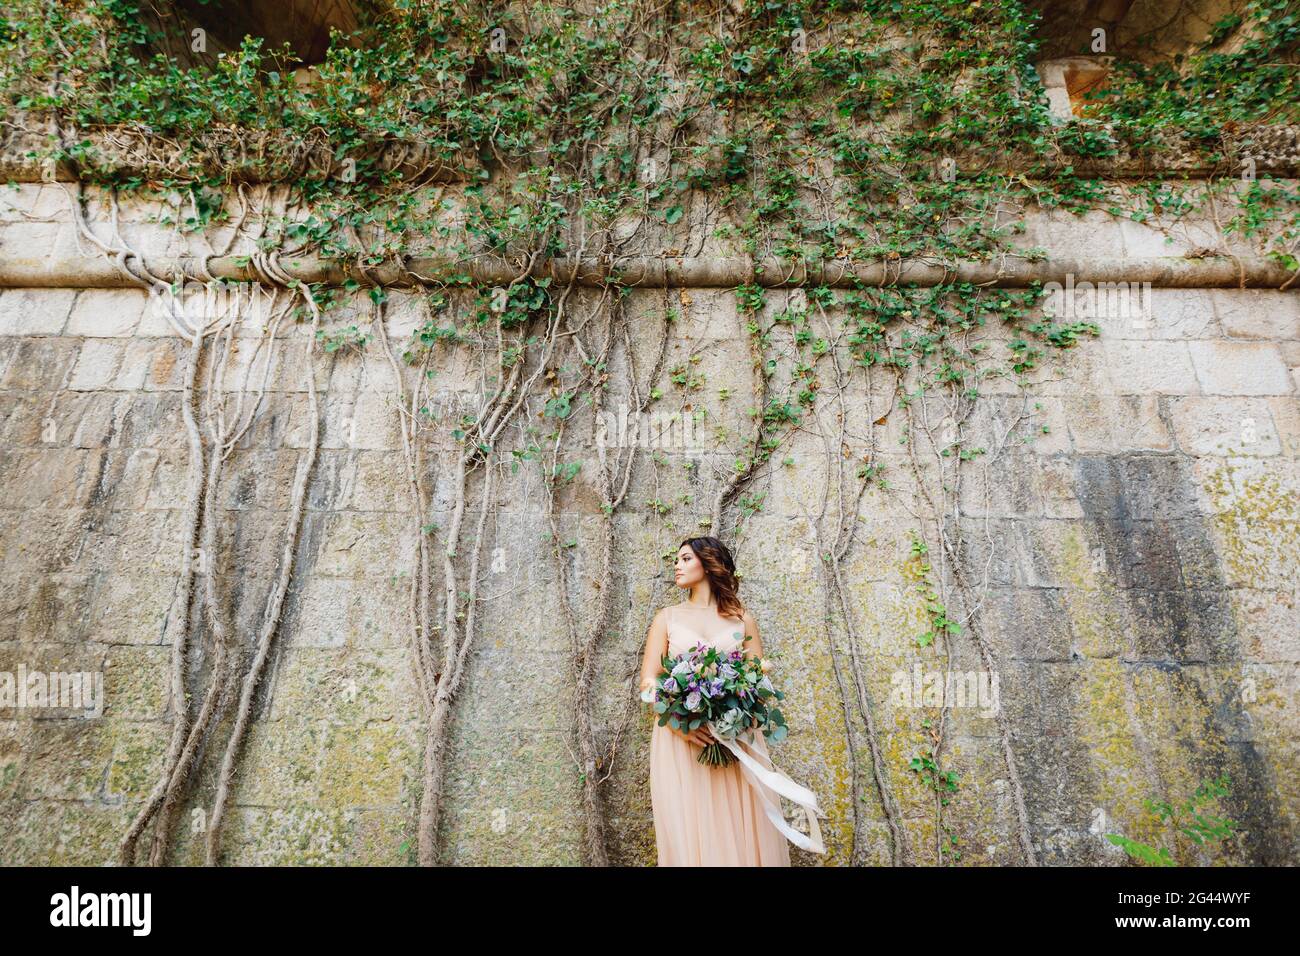 Lovely bride in a pastel dress with a luxurious bouquet of flowers stands against the background of a stone wall entwined with g Stock Photo